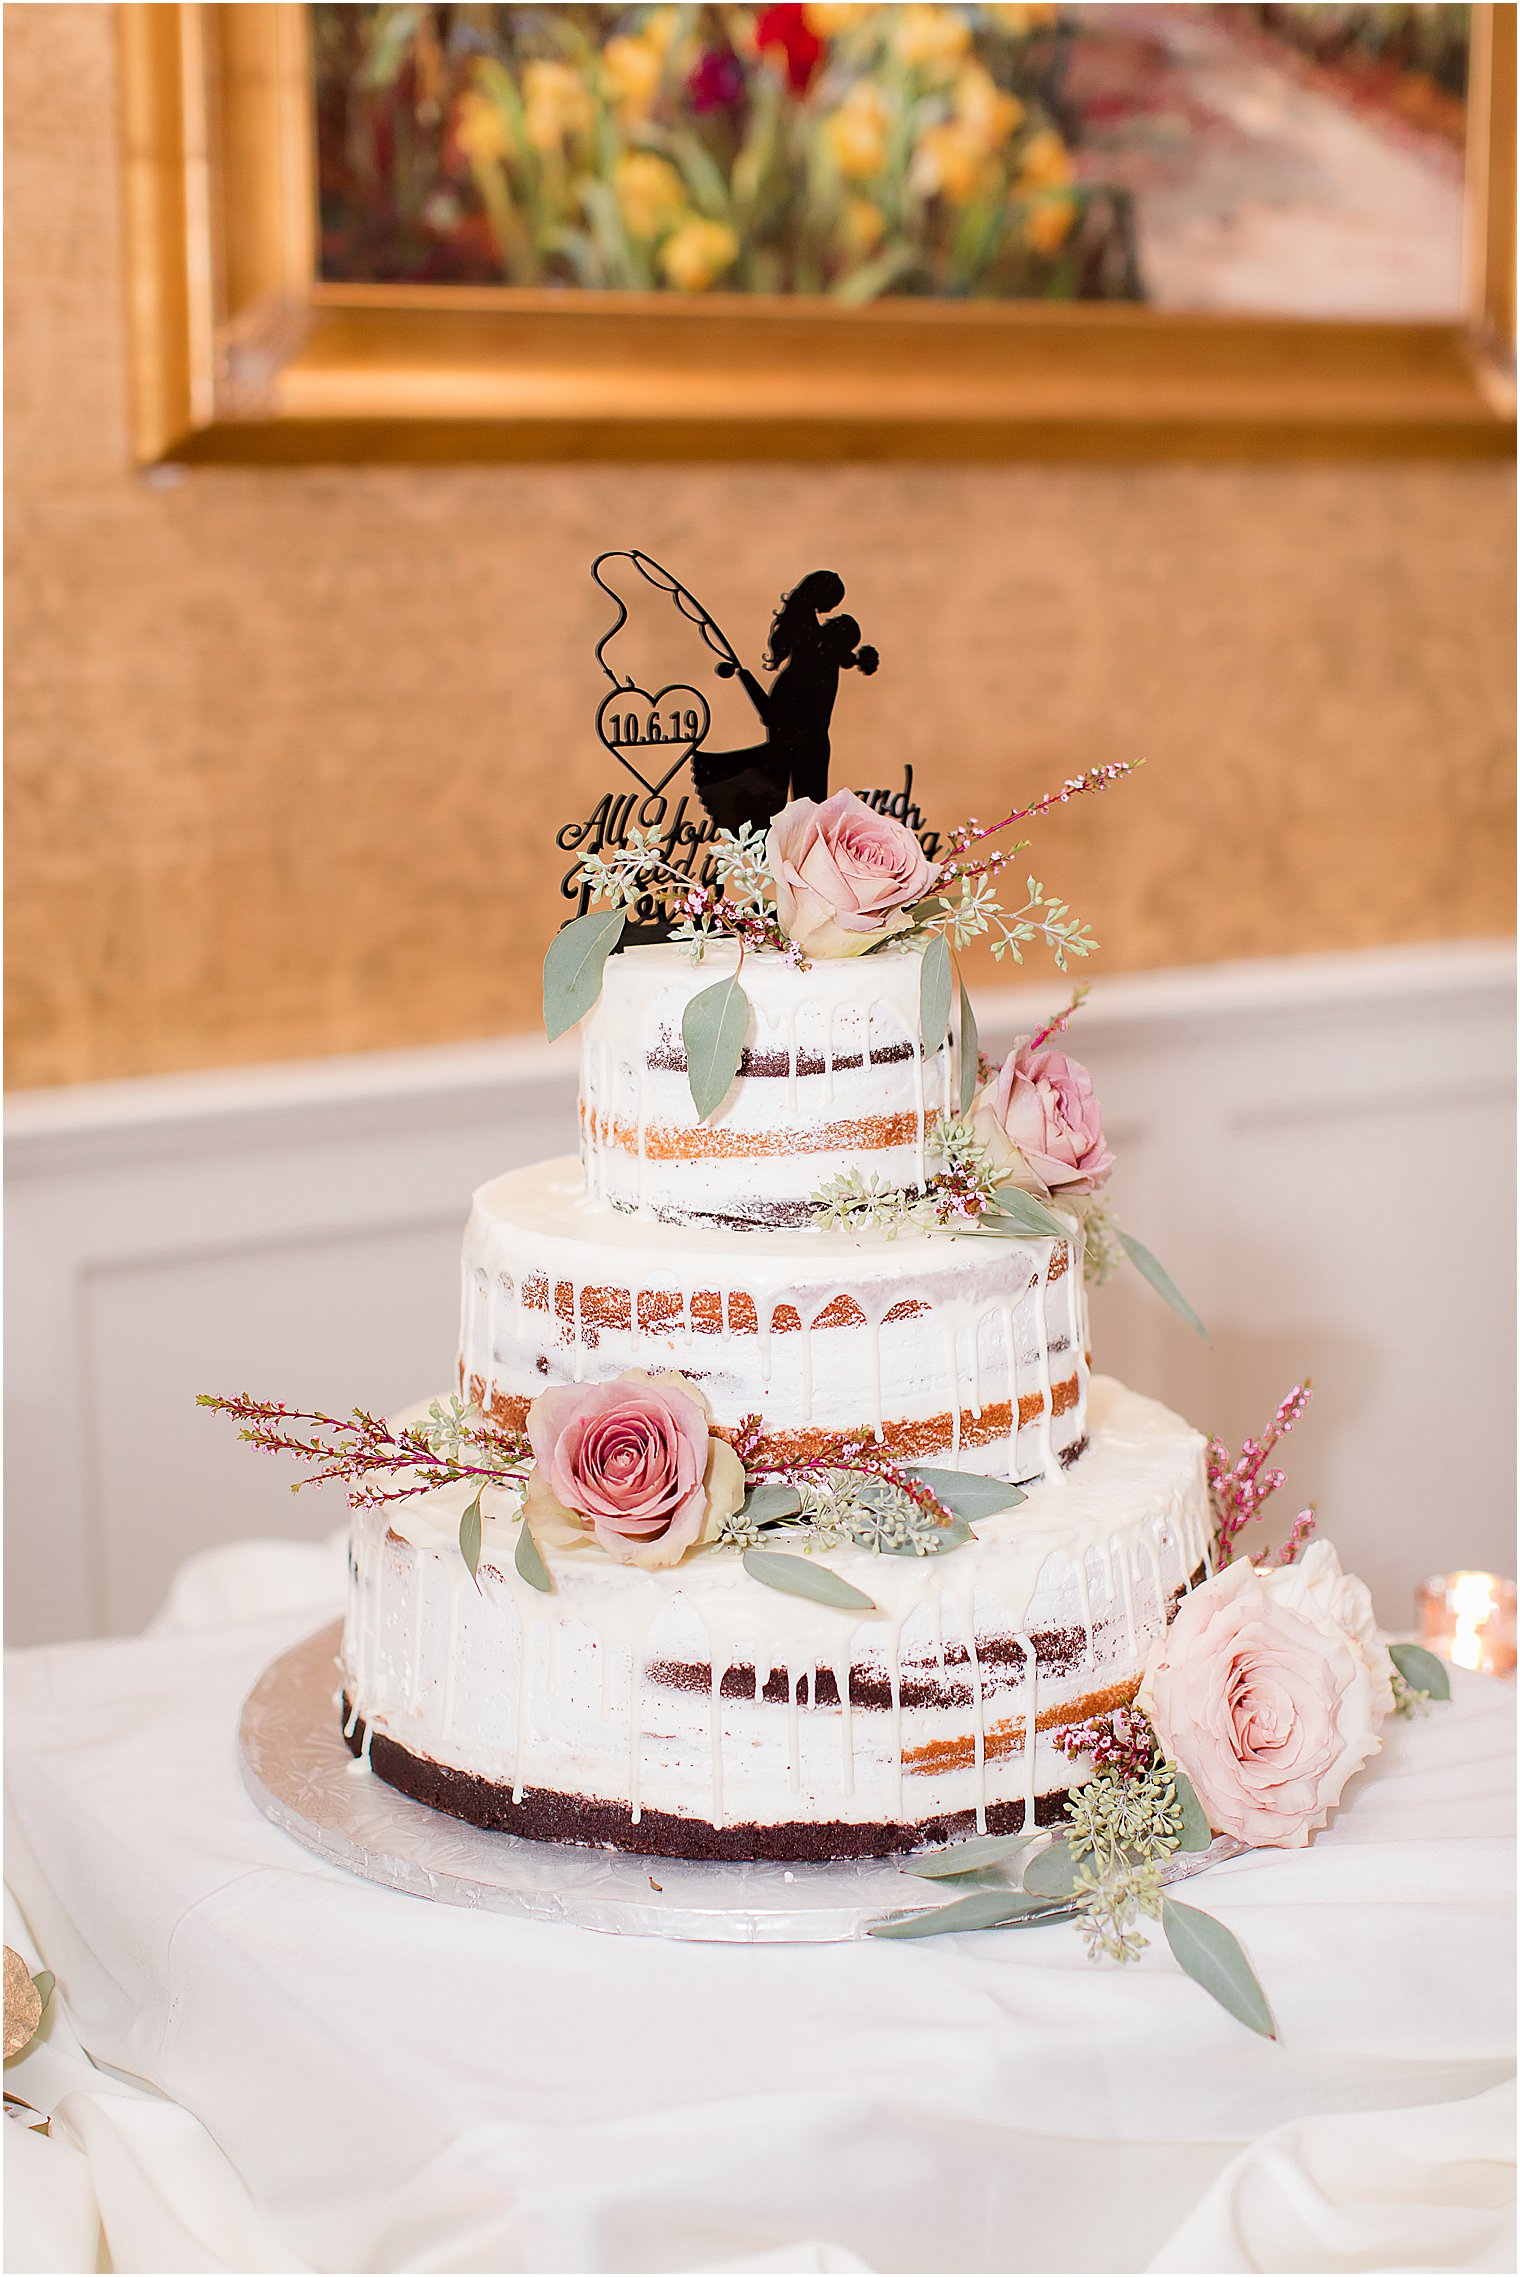 naked wedding cake with black topper from Bovella's Pastry Shoppe